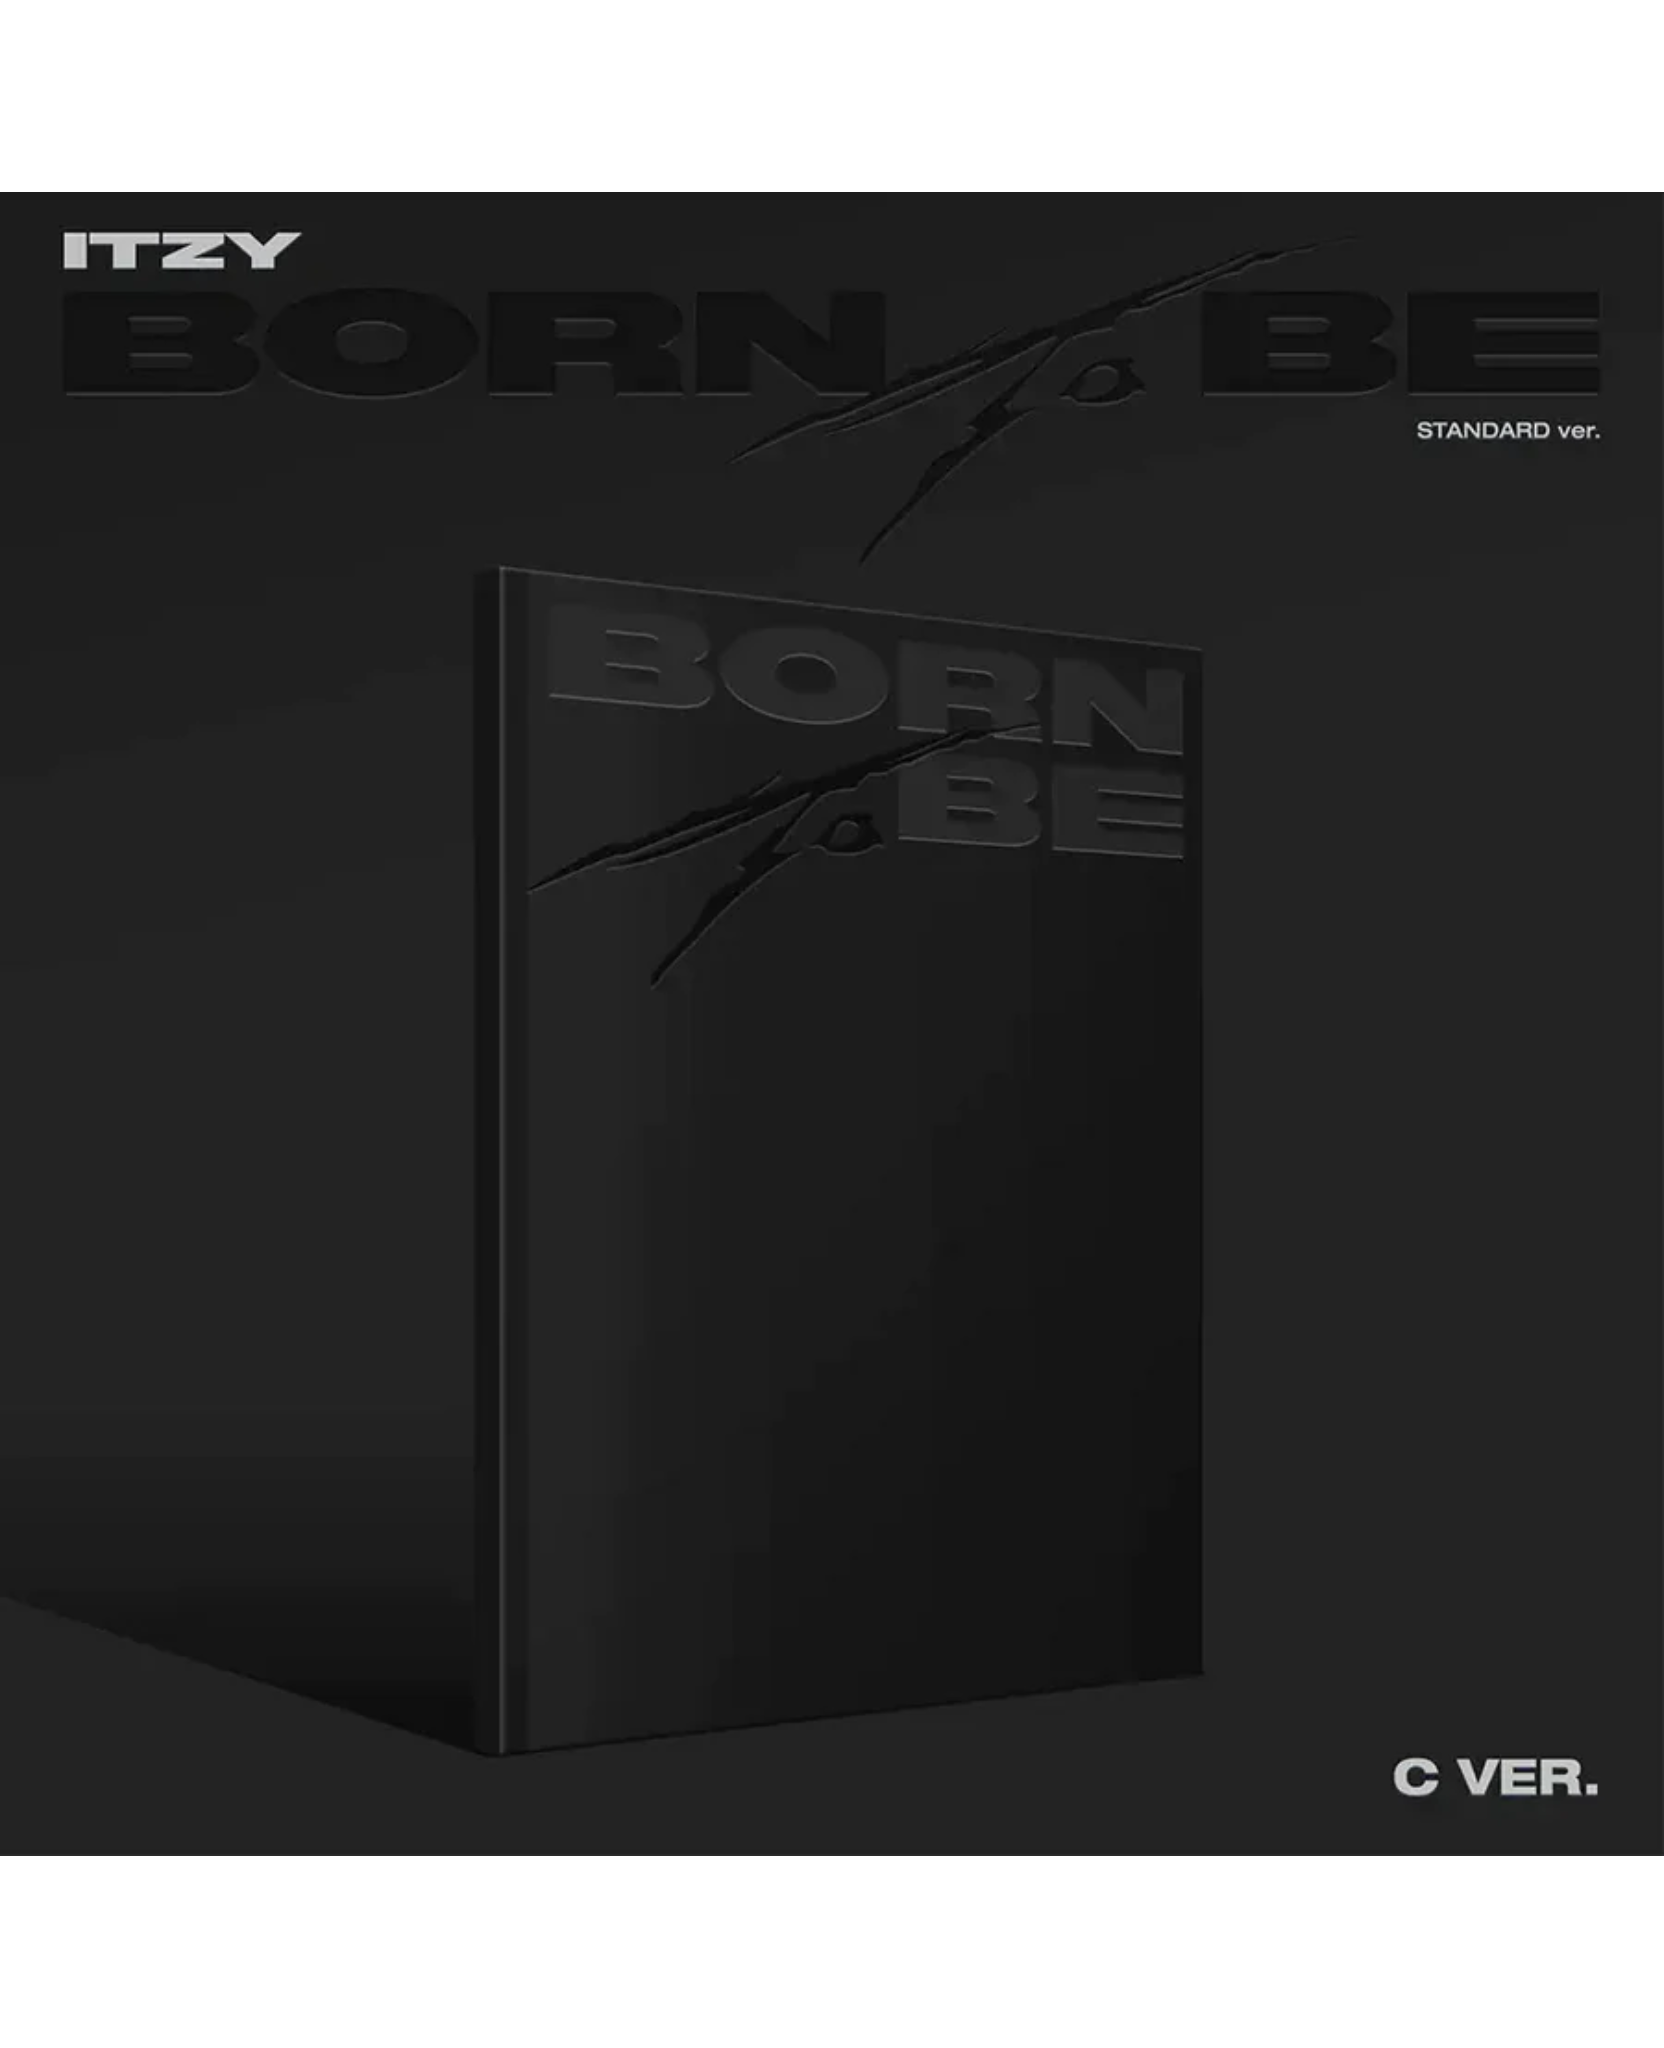 [COMING SOON] ITZY - BORN TO BE [Standard Ver.] ITZY